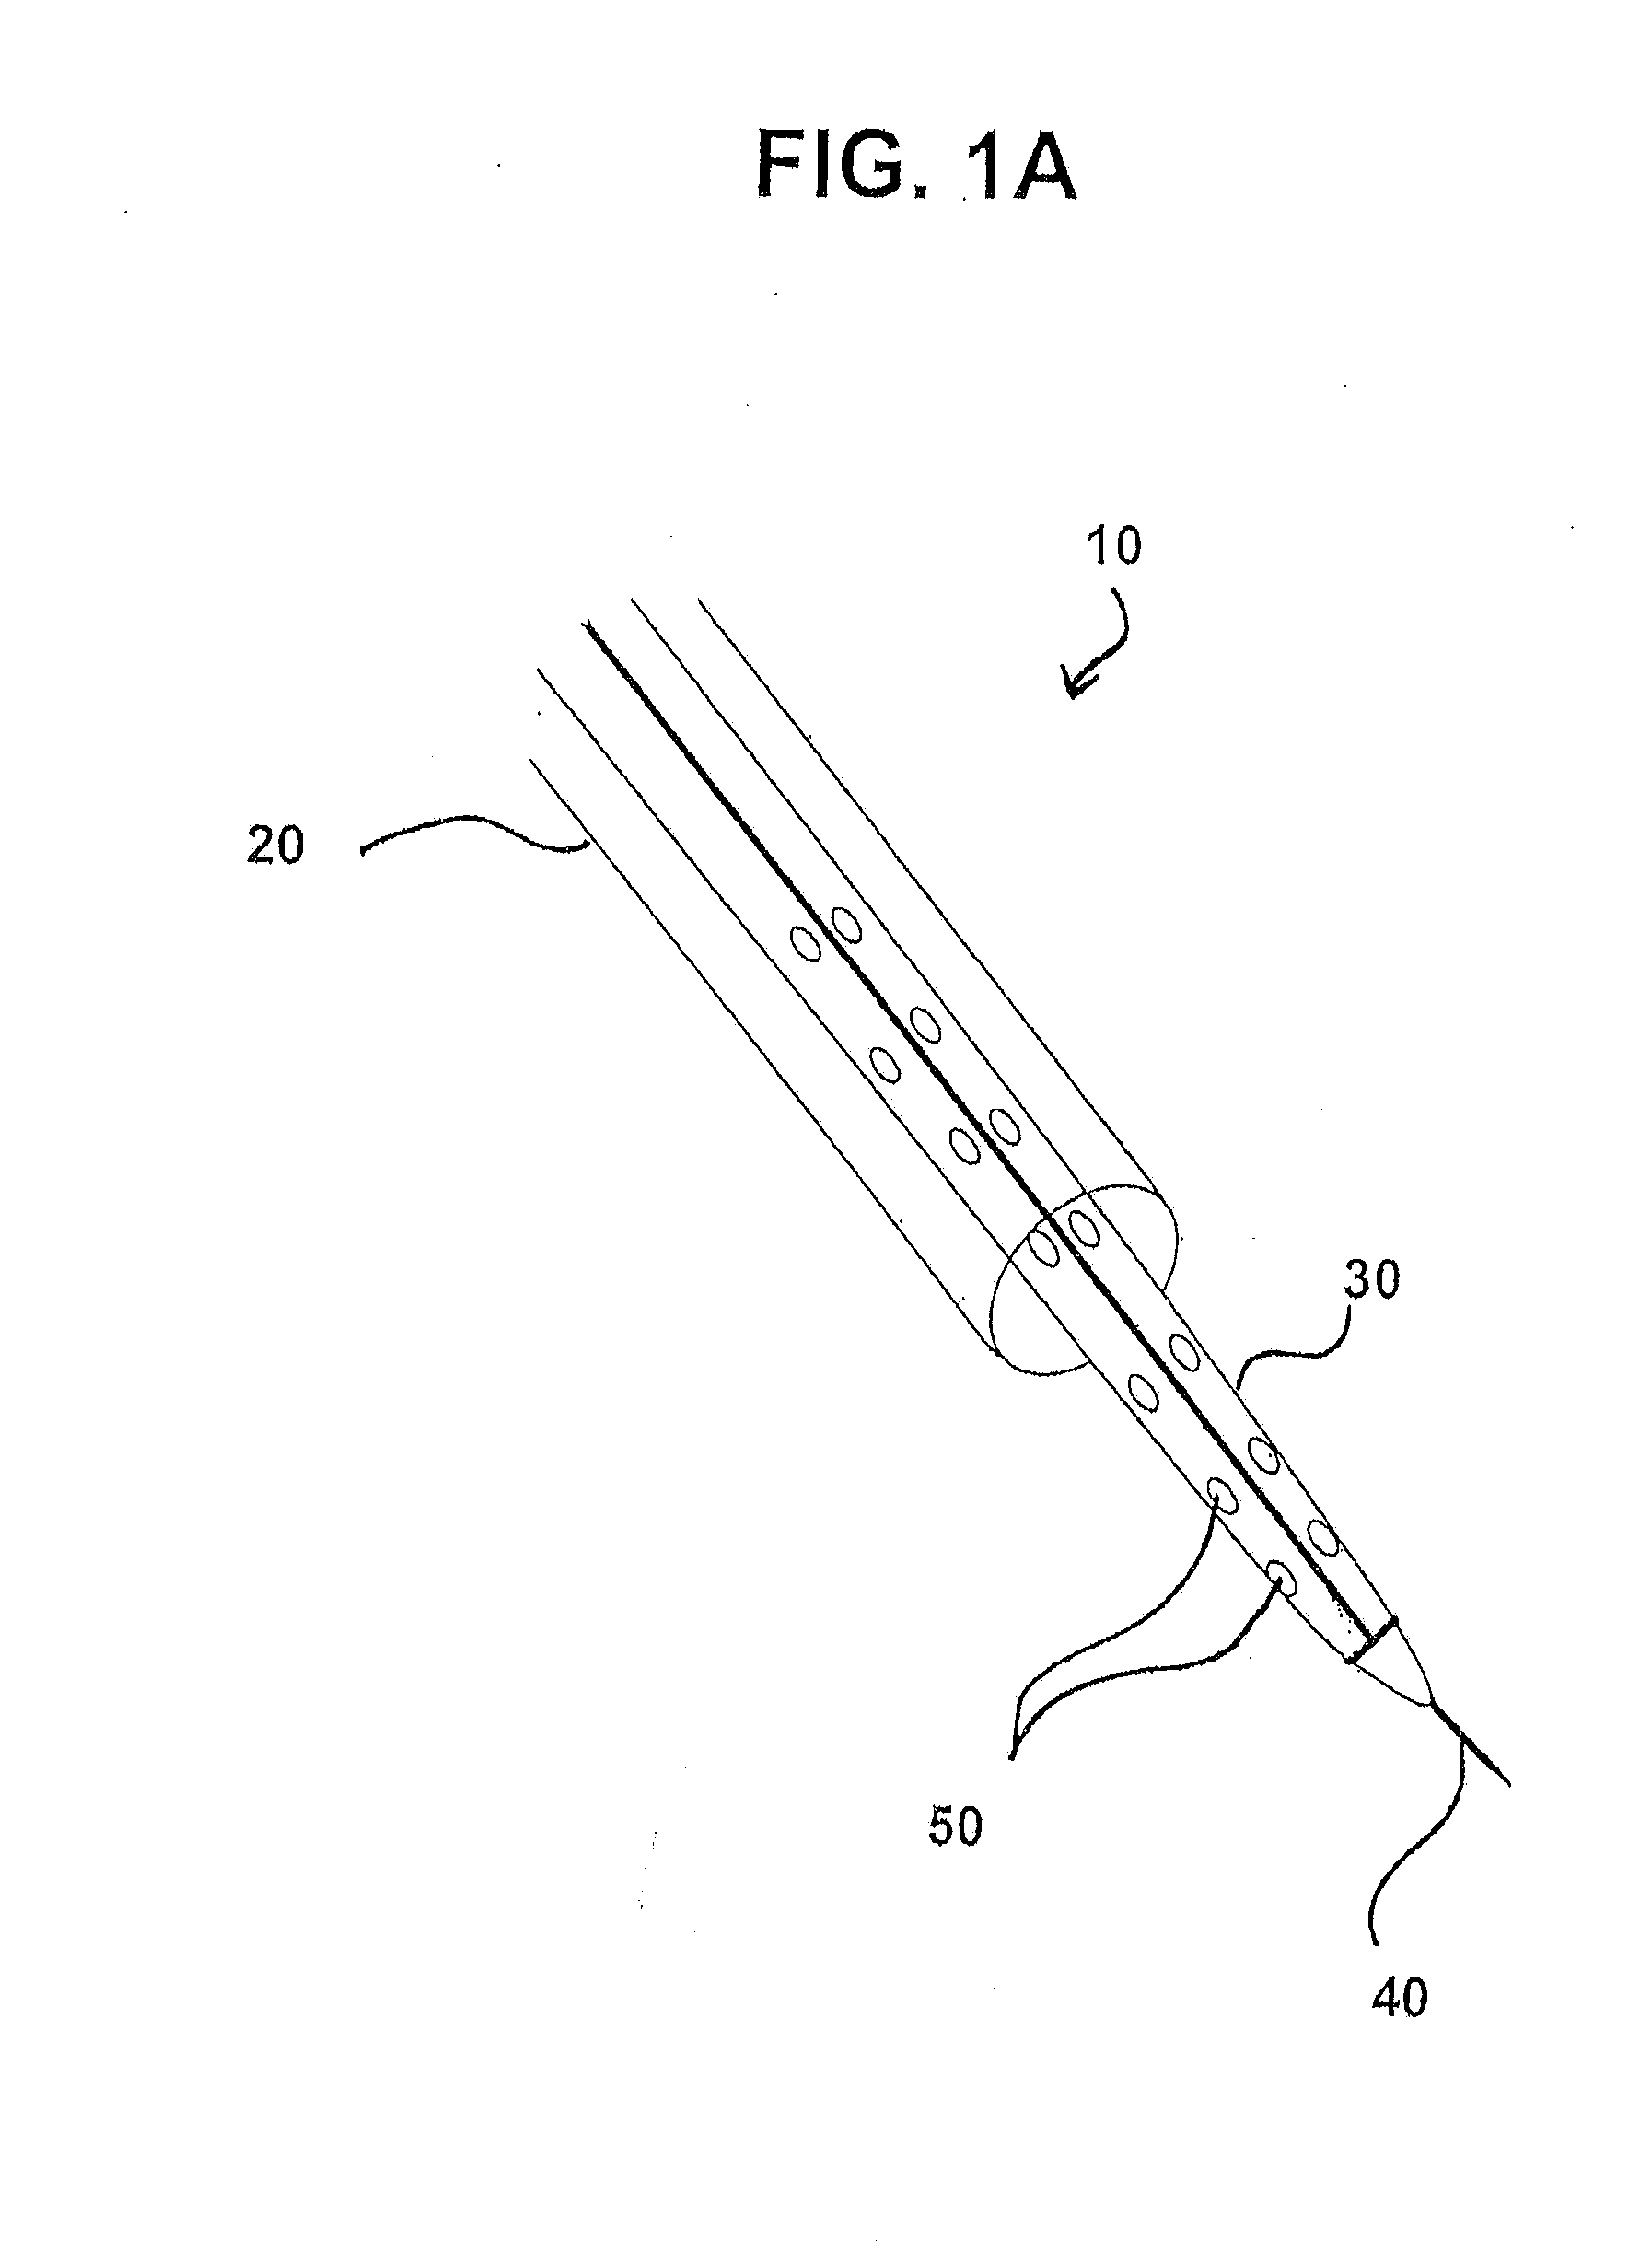 Systems and methods for localization of a puncture site relative to a mammalian tissue of interest